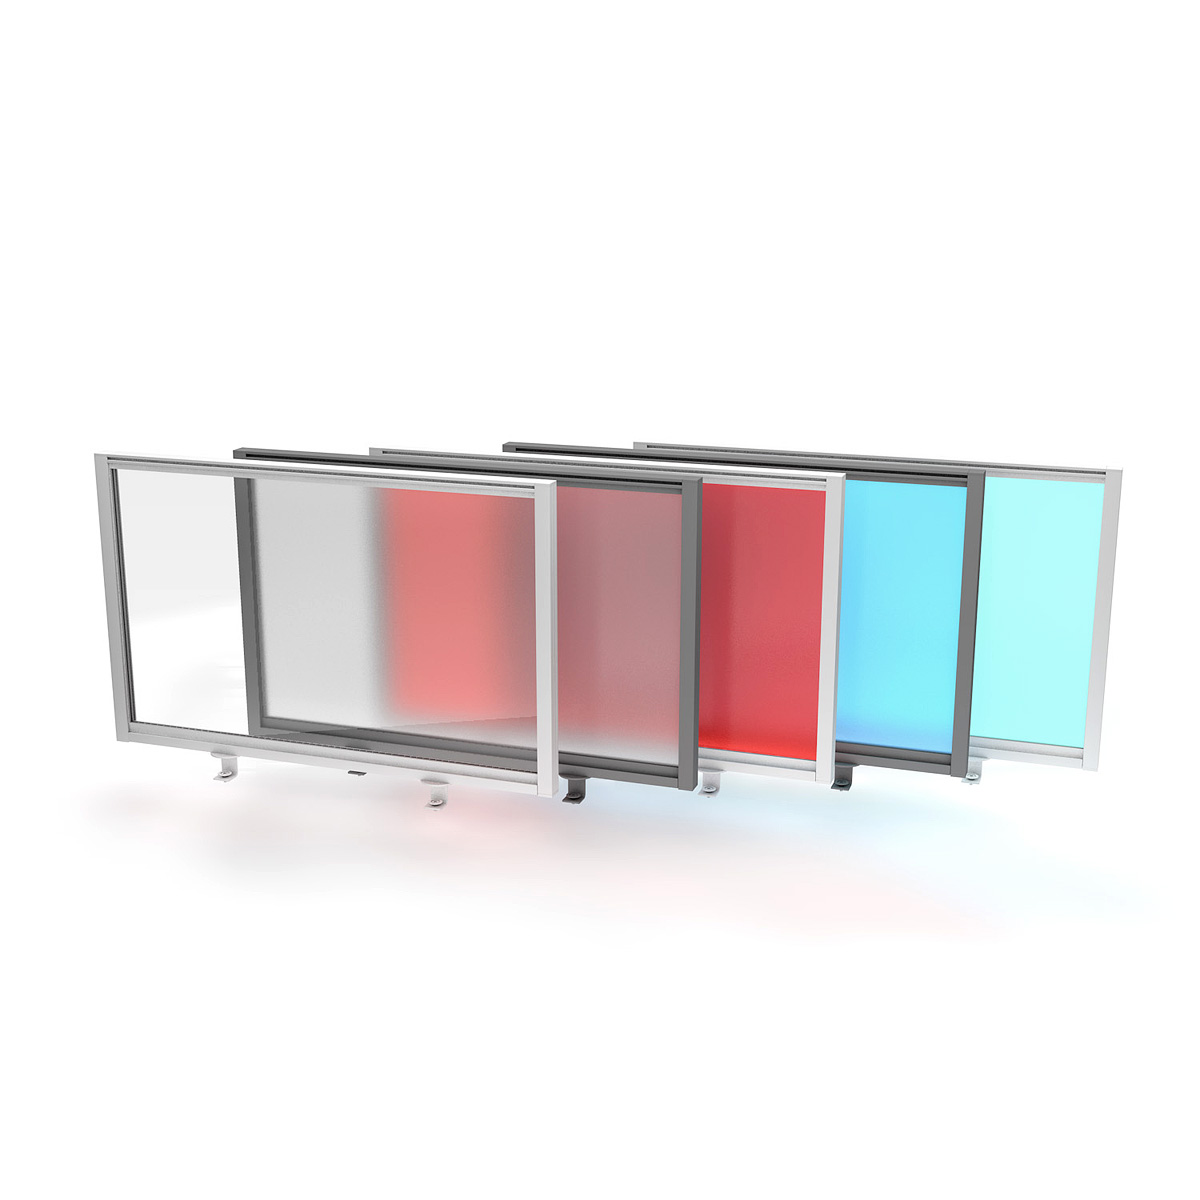 FRONTIER® Glazed Office Screen Desk Dividers - 5 Perspex Screen Finishes